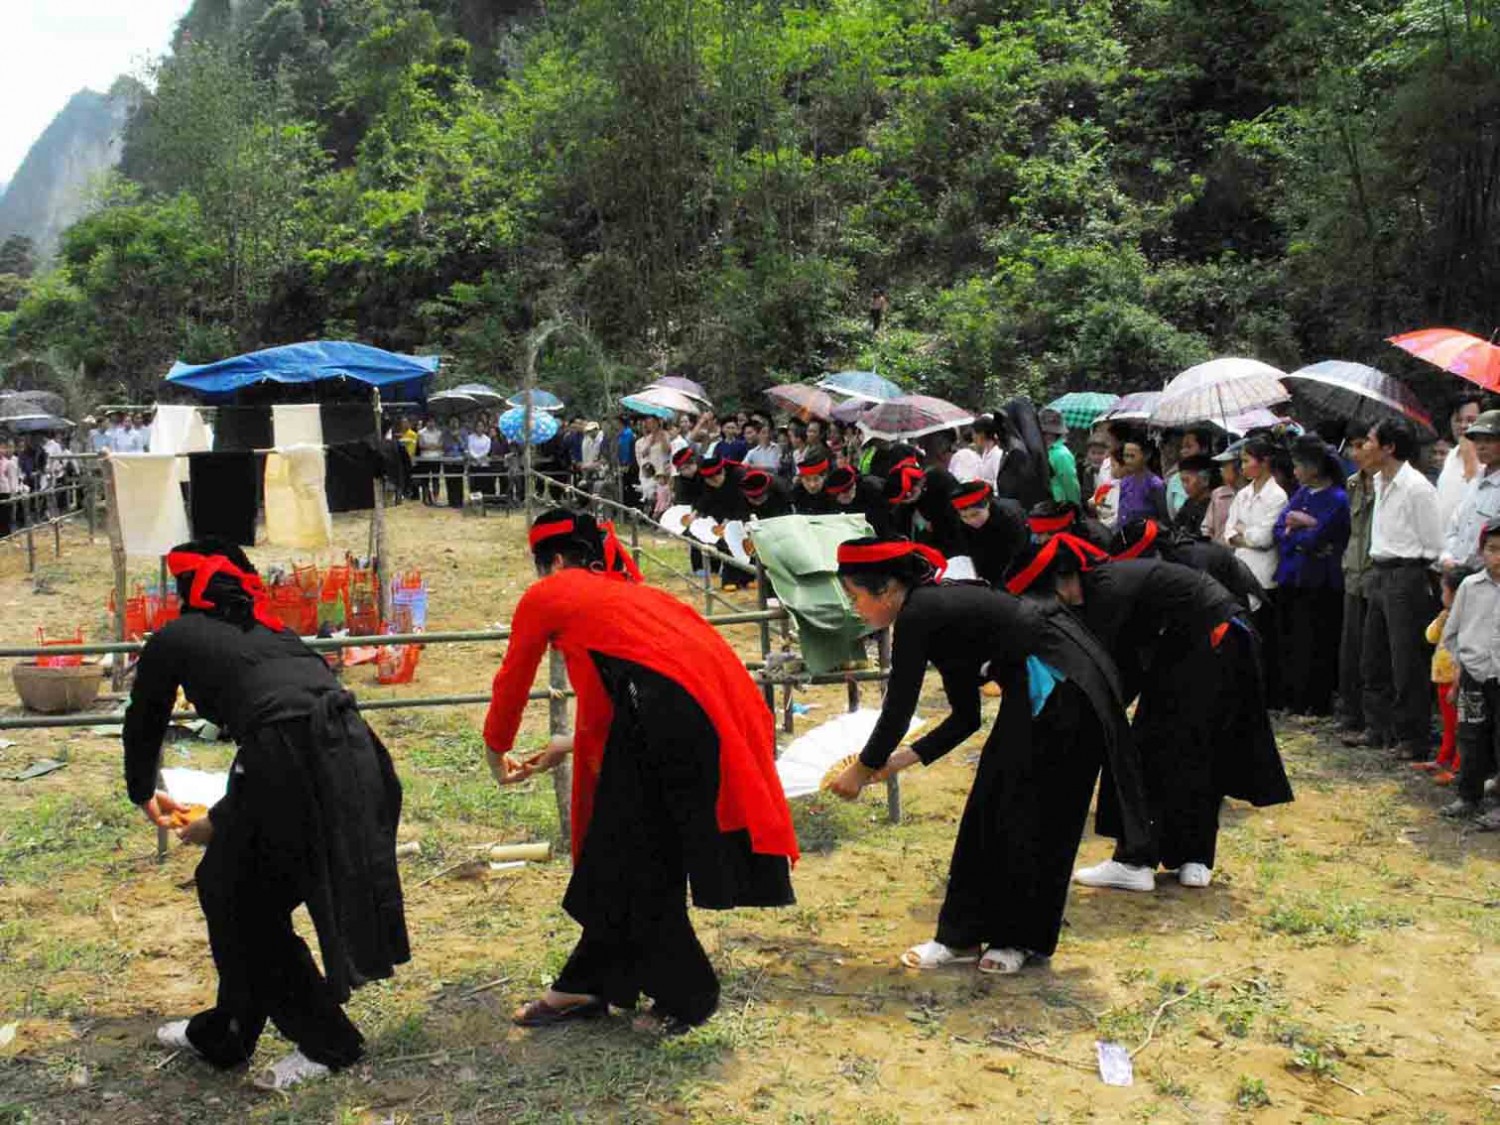 Sluong dancing at the Festival in Chu Lang, Kim Dong, Thach An district.